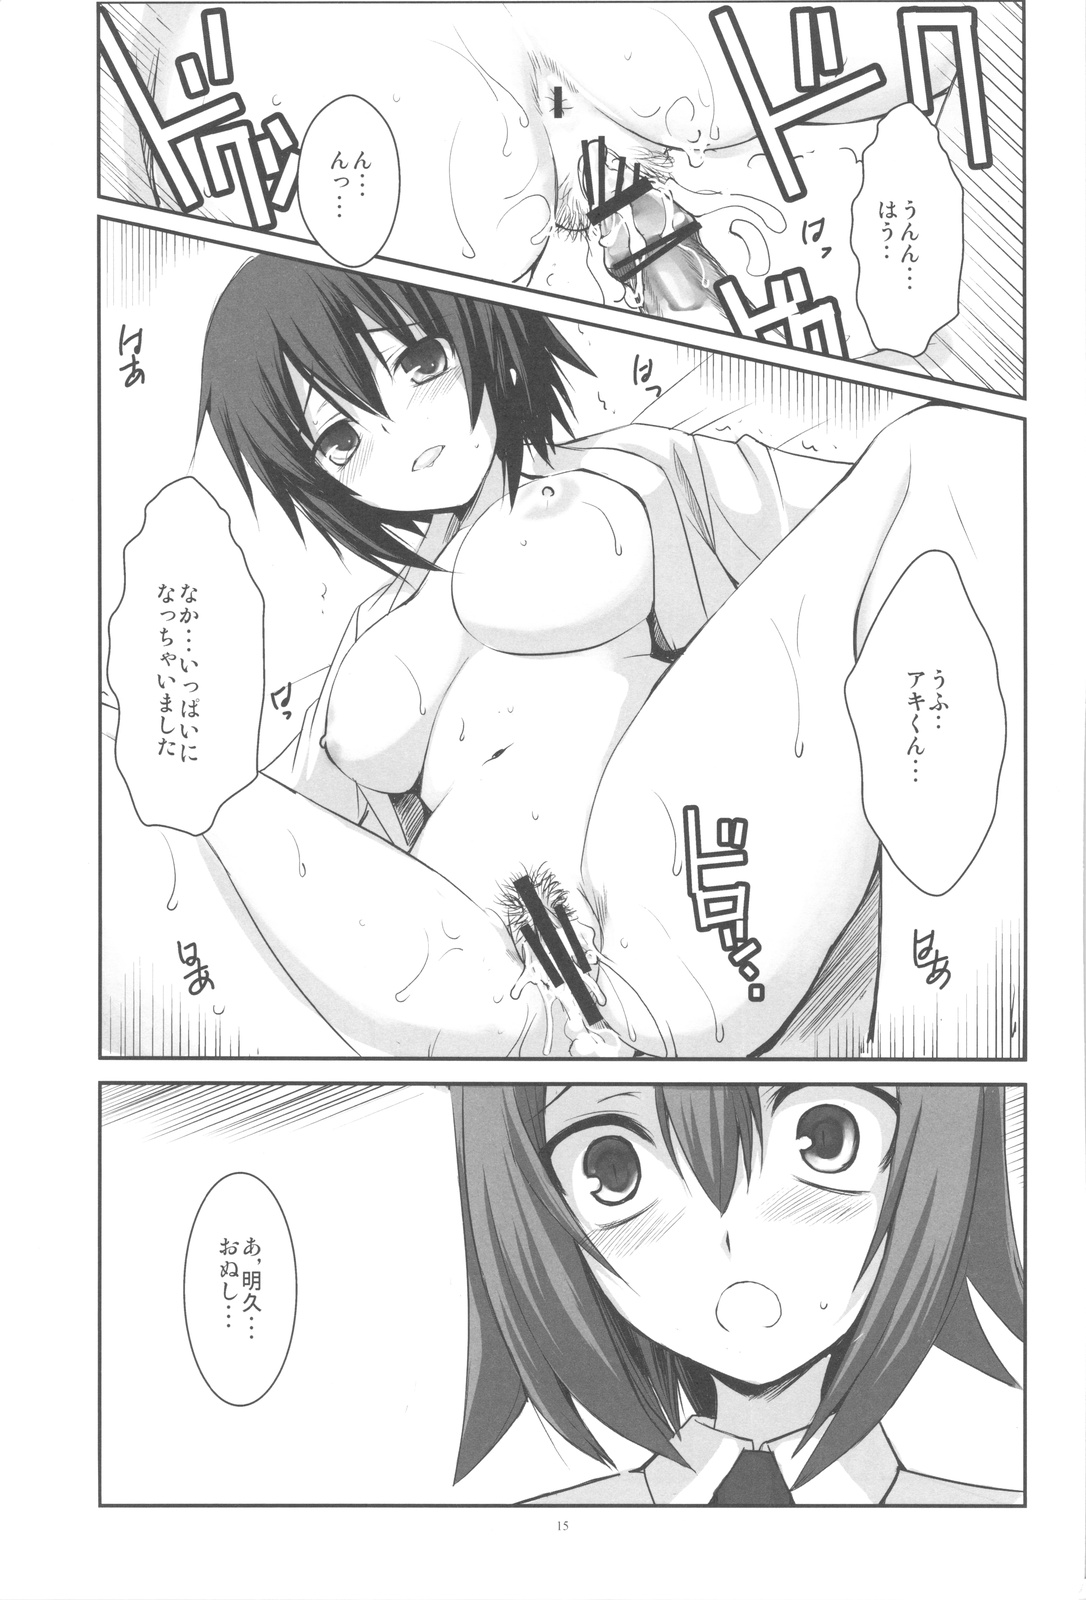 (COMIC1☆4) [R-WORKS] LOVE IS GAME OVER (Baka to Test to Shoukanjuu) page 15 full